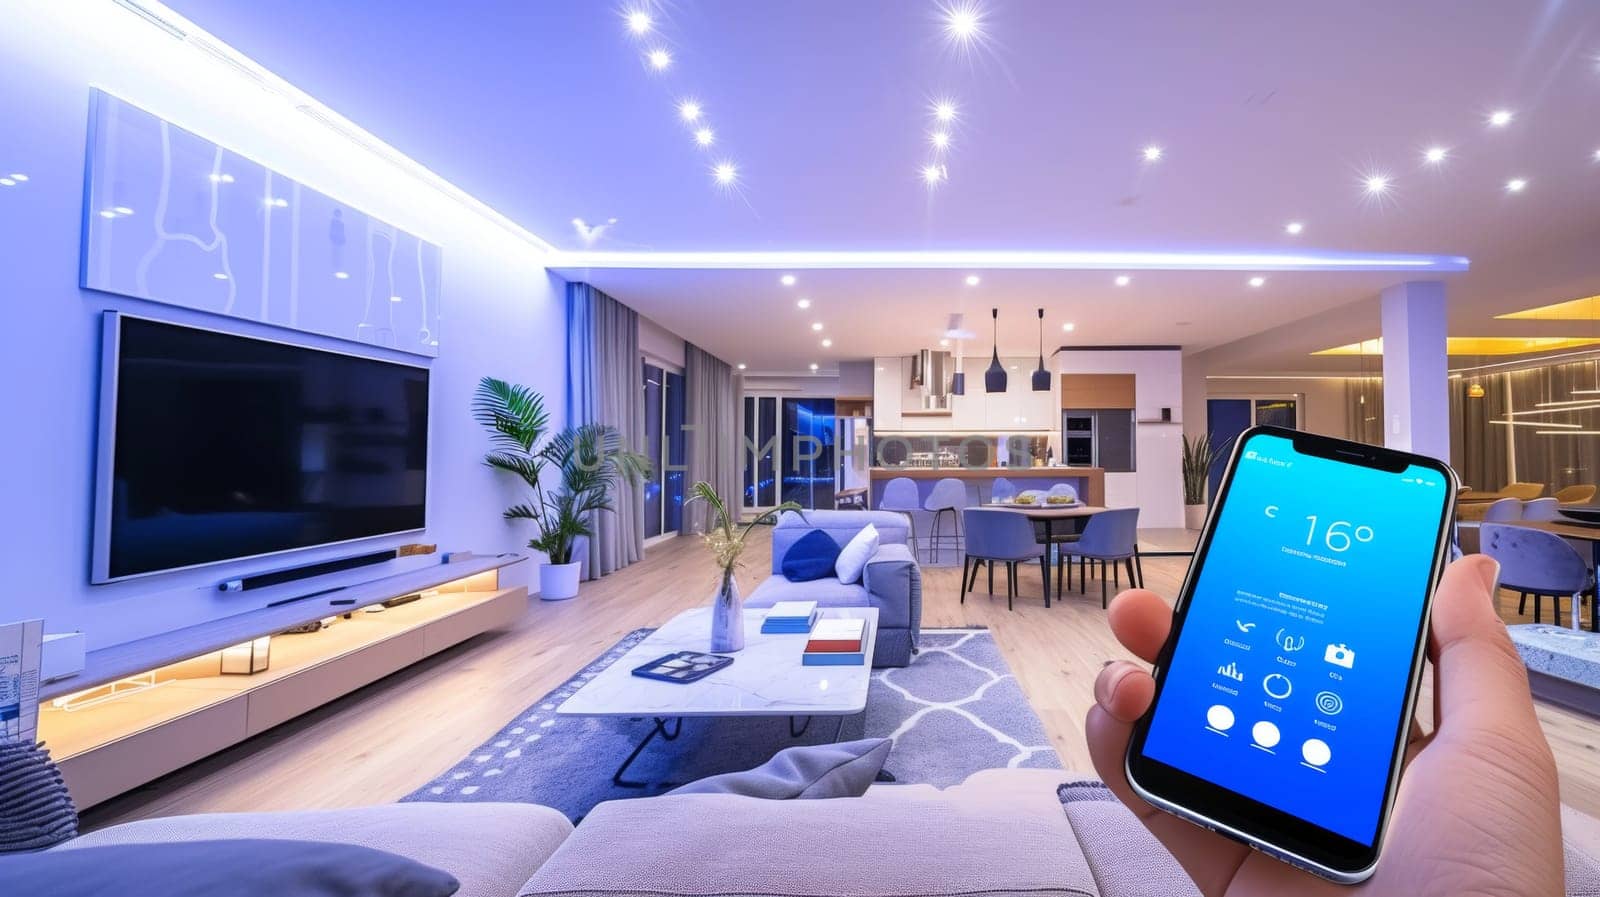 Mobile phone in foreground controlling a well-lit, modern smart home interior